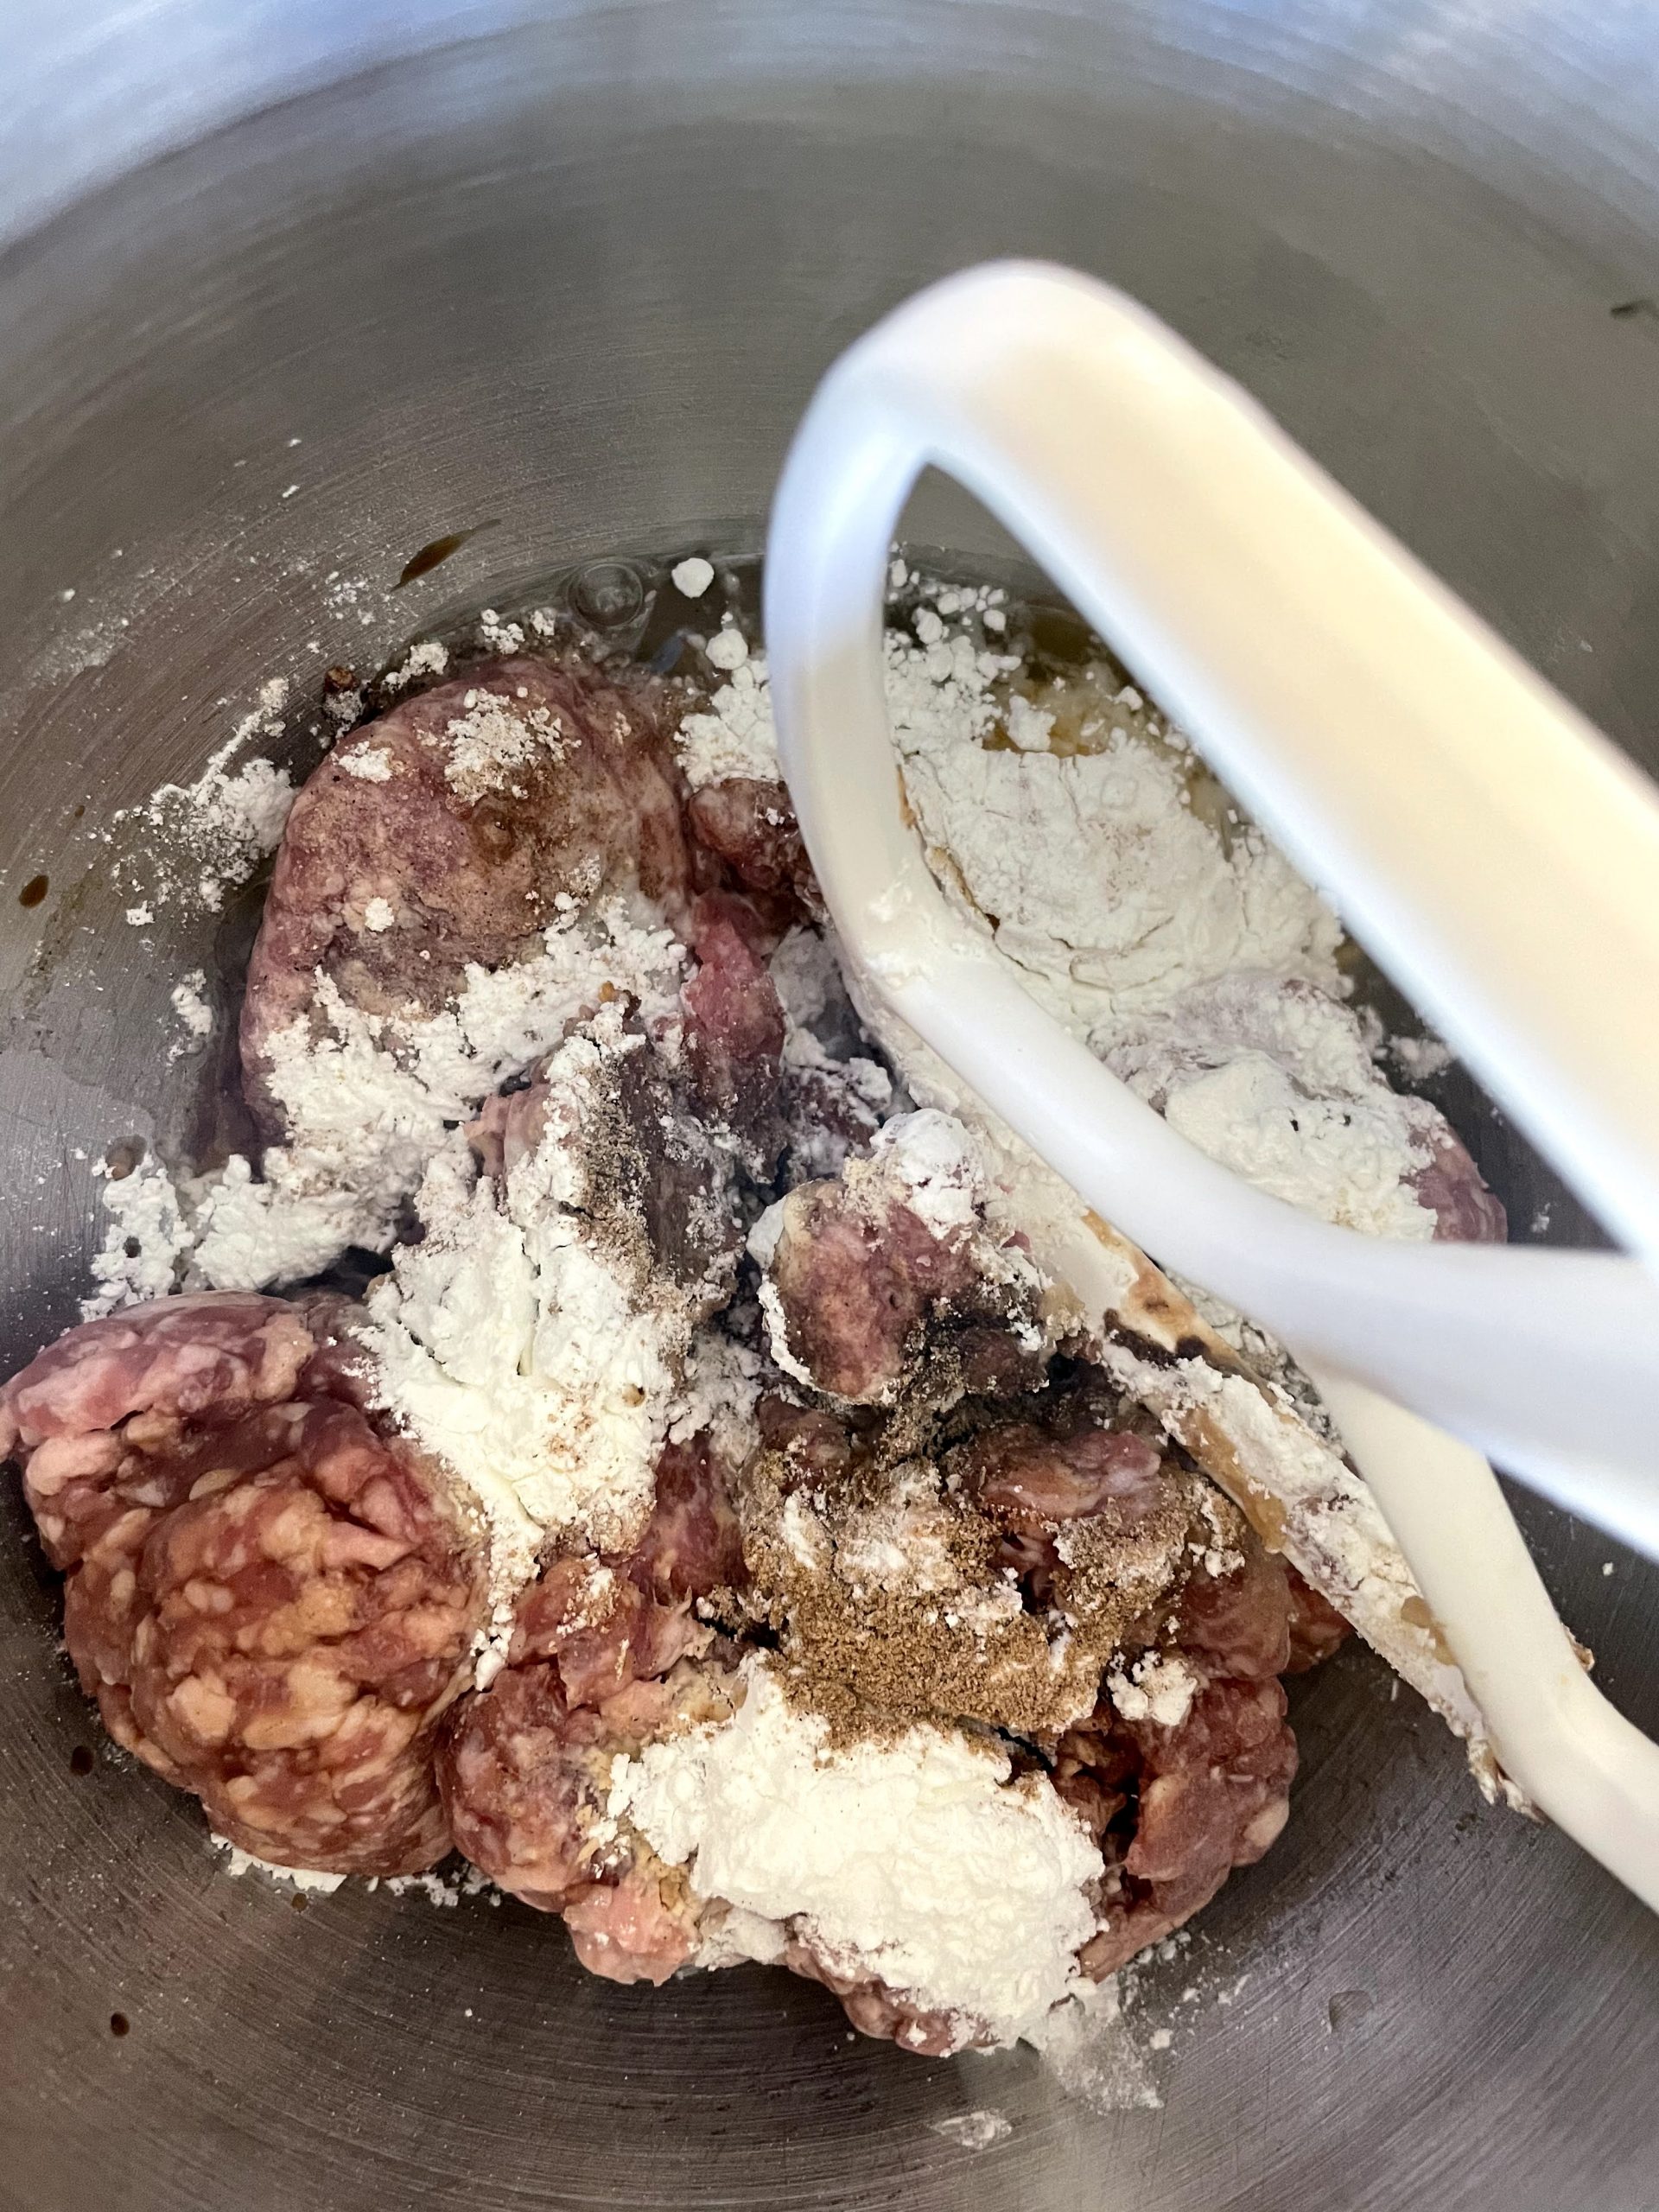 Add ingredients and ground pork to mixer.